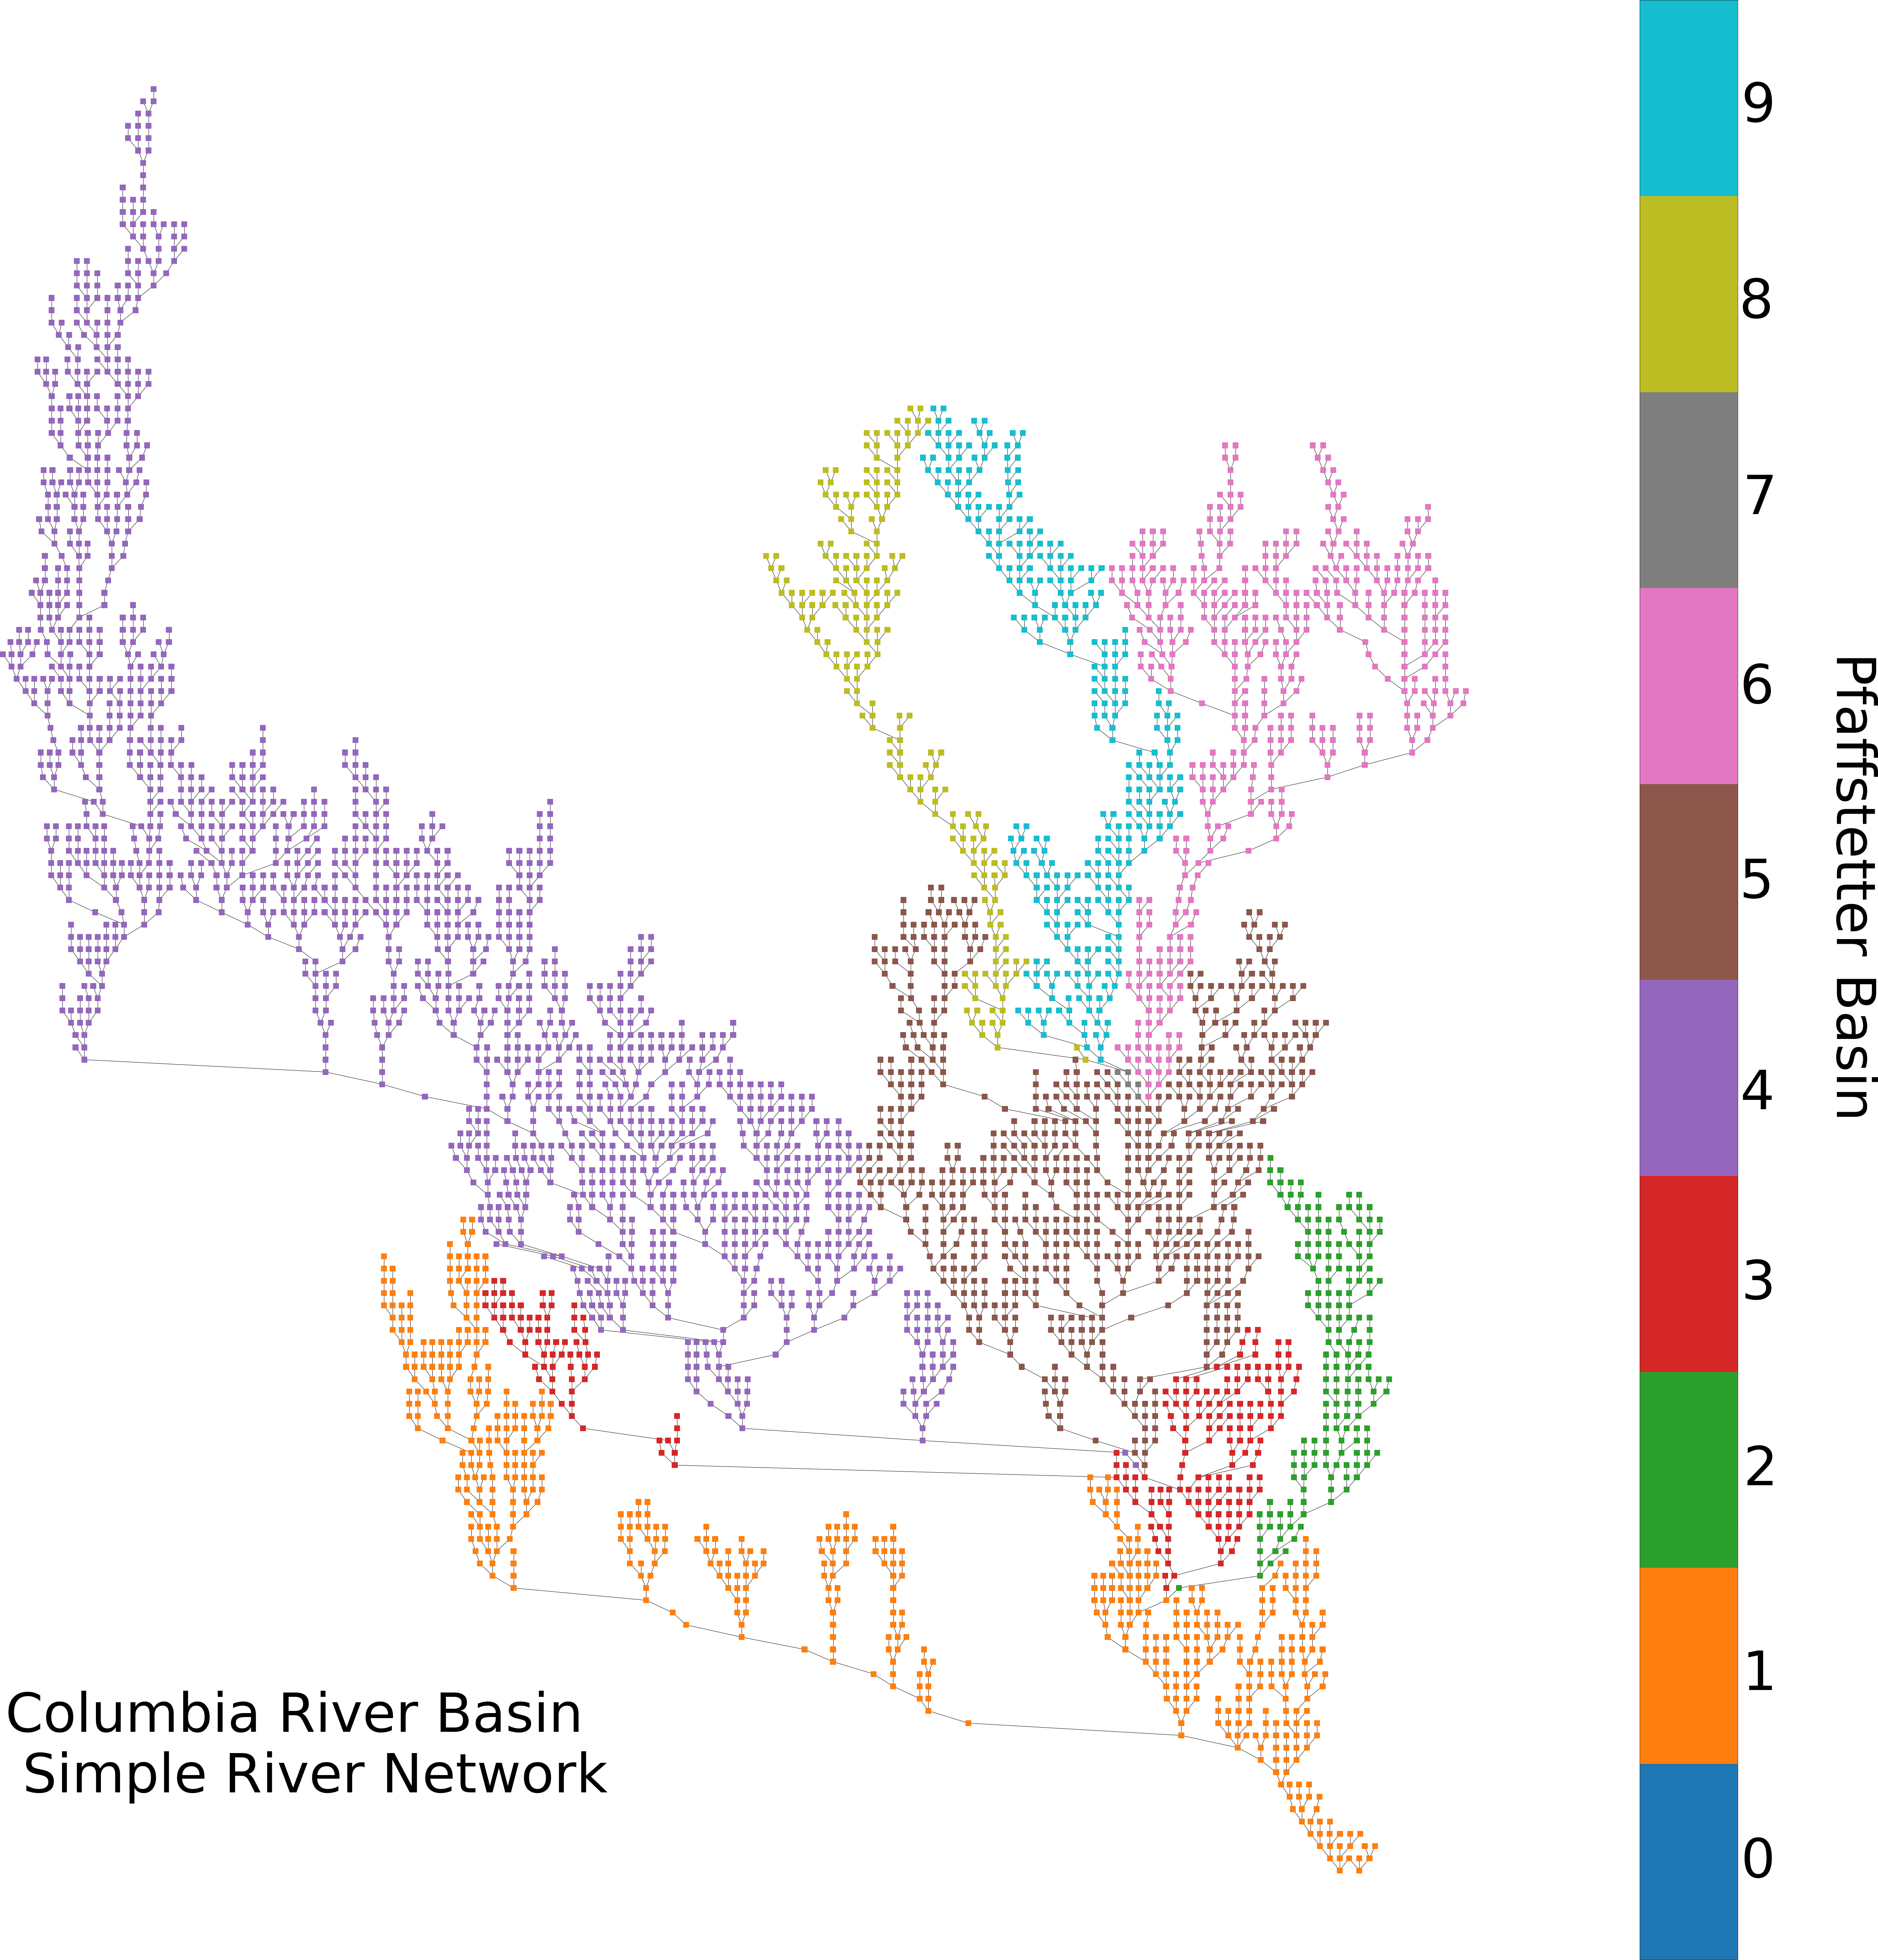 Nodal network of the Columbia River Basin showing river segment connections and color-coded by Pfaffsetter basin.